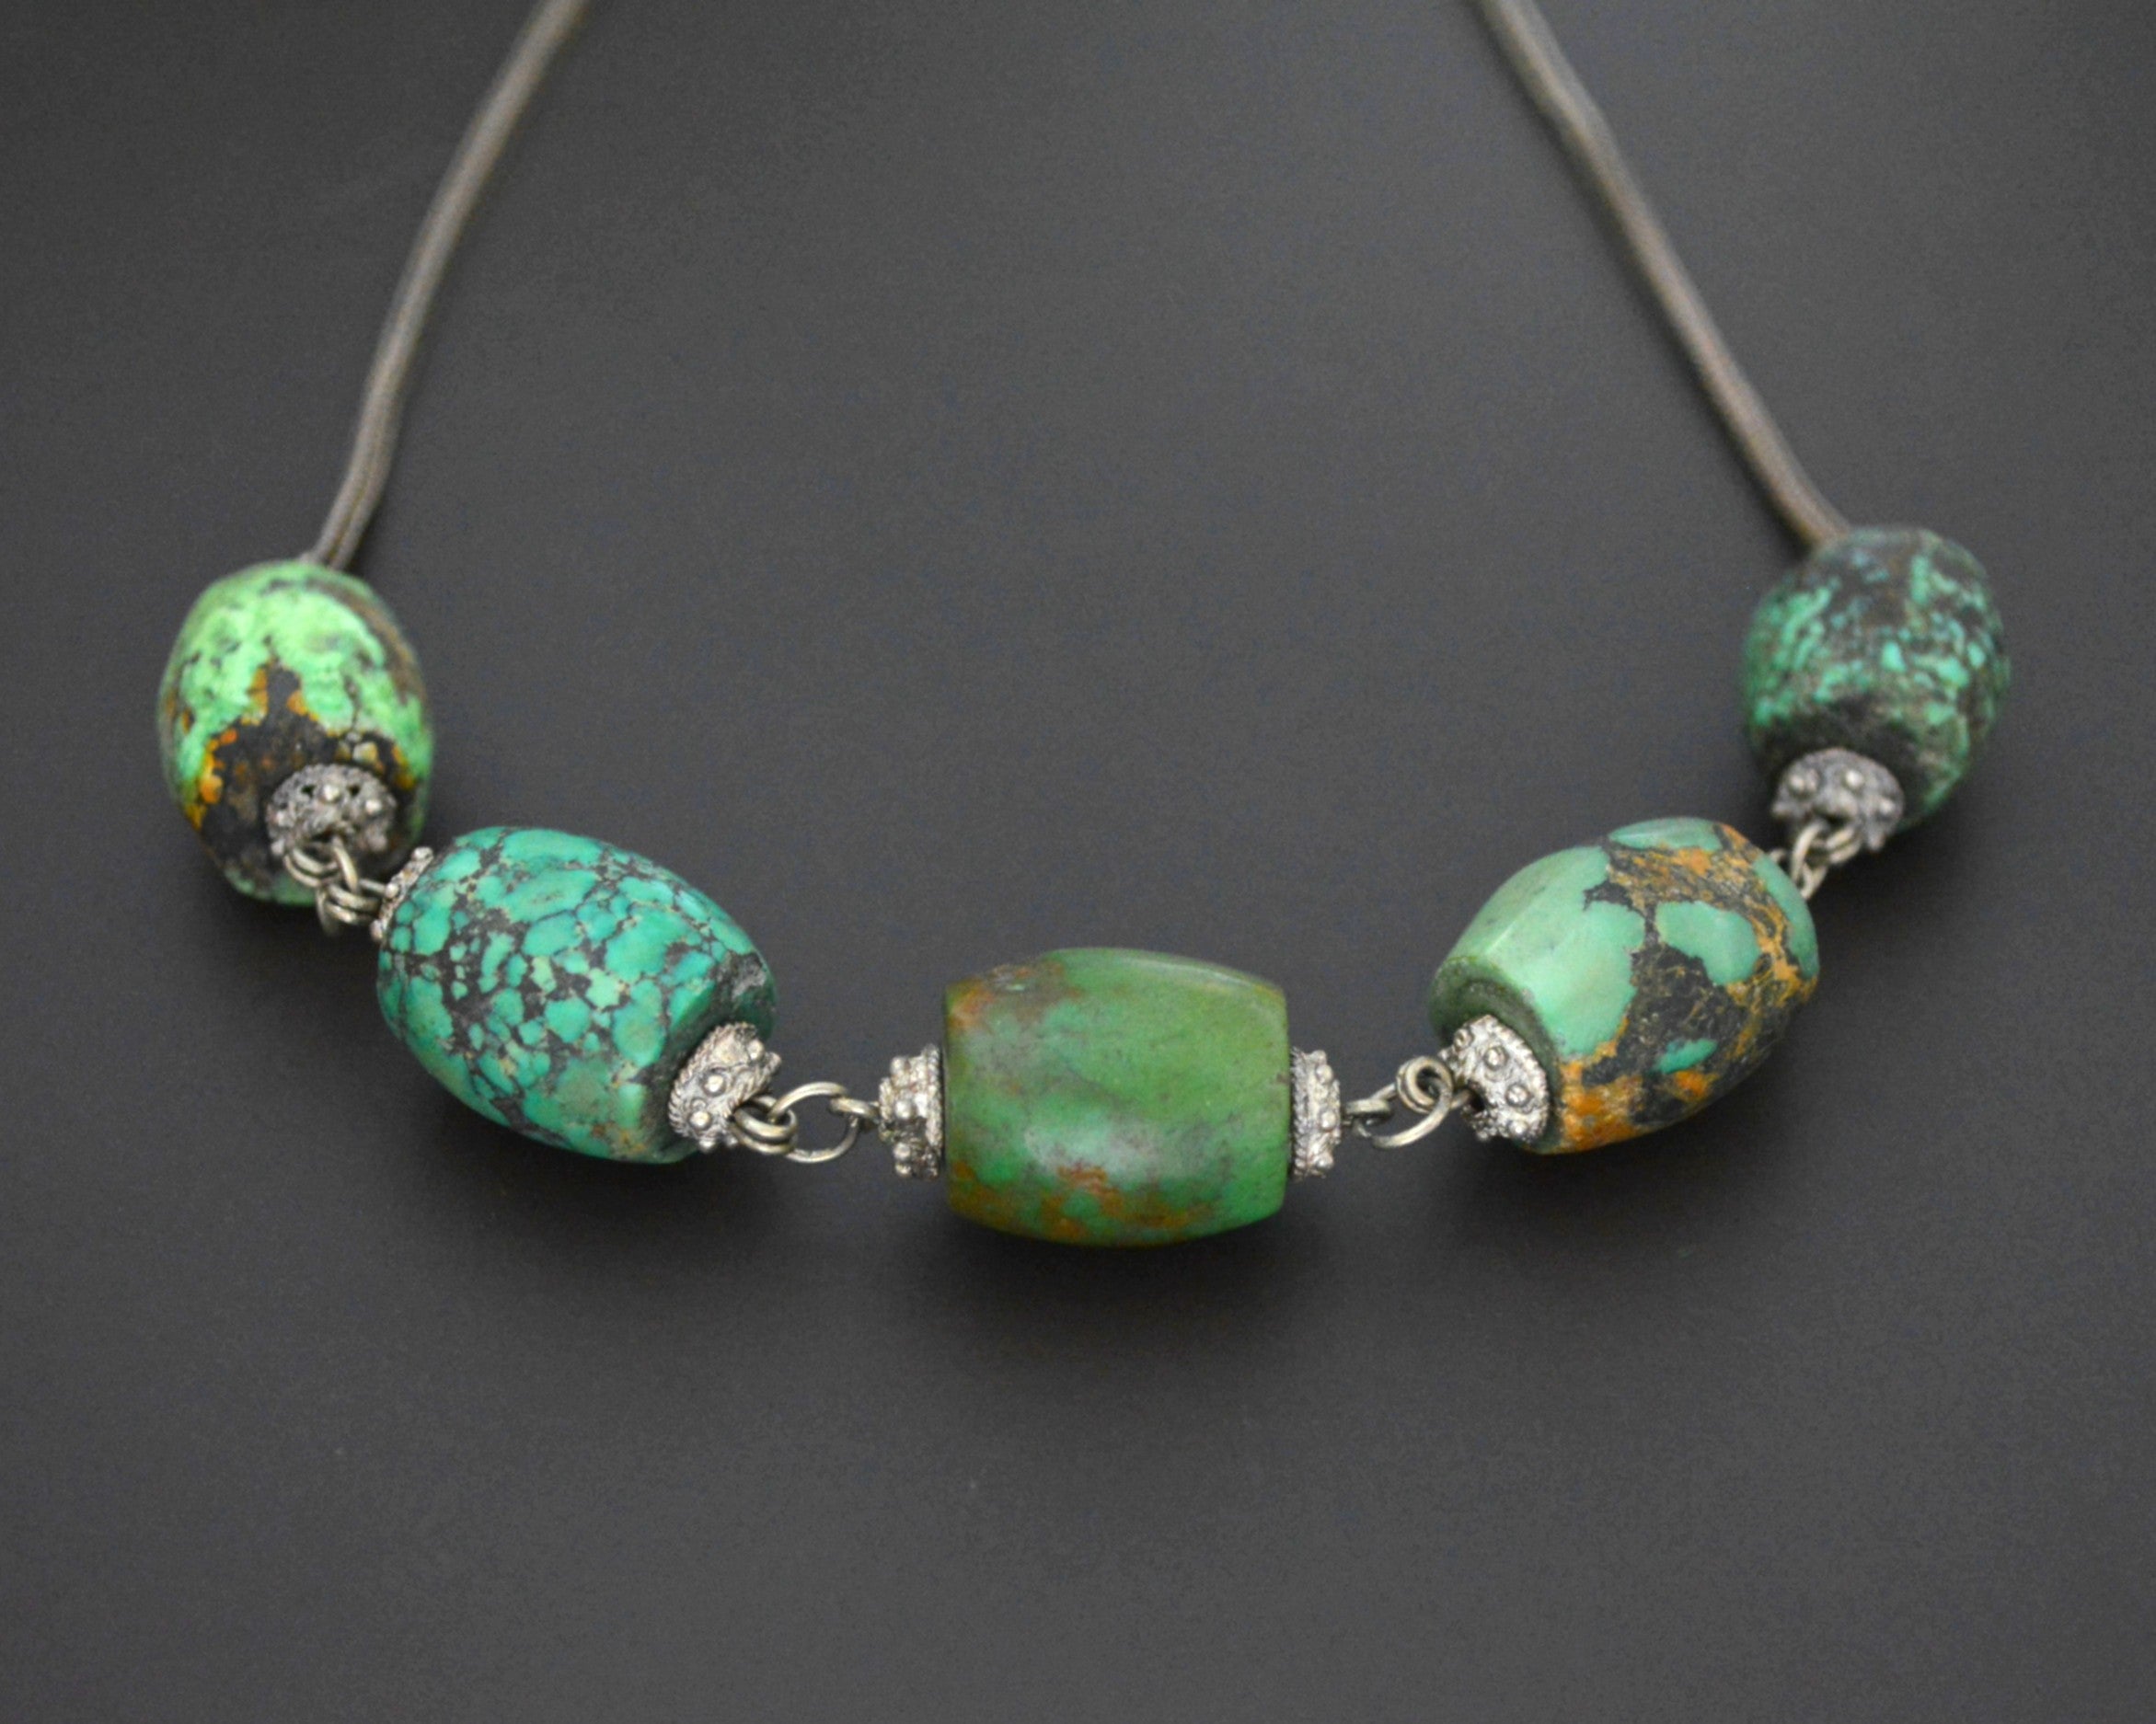 Tibetan Turquoise Bead Necklace on Silver Chain